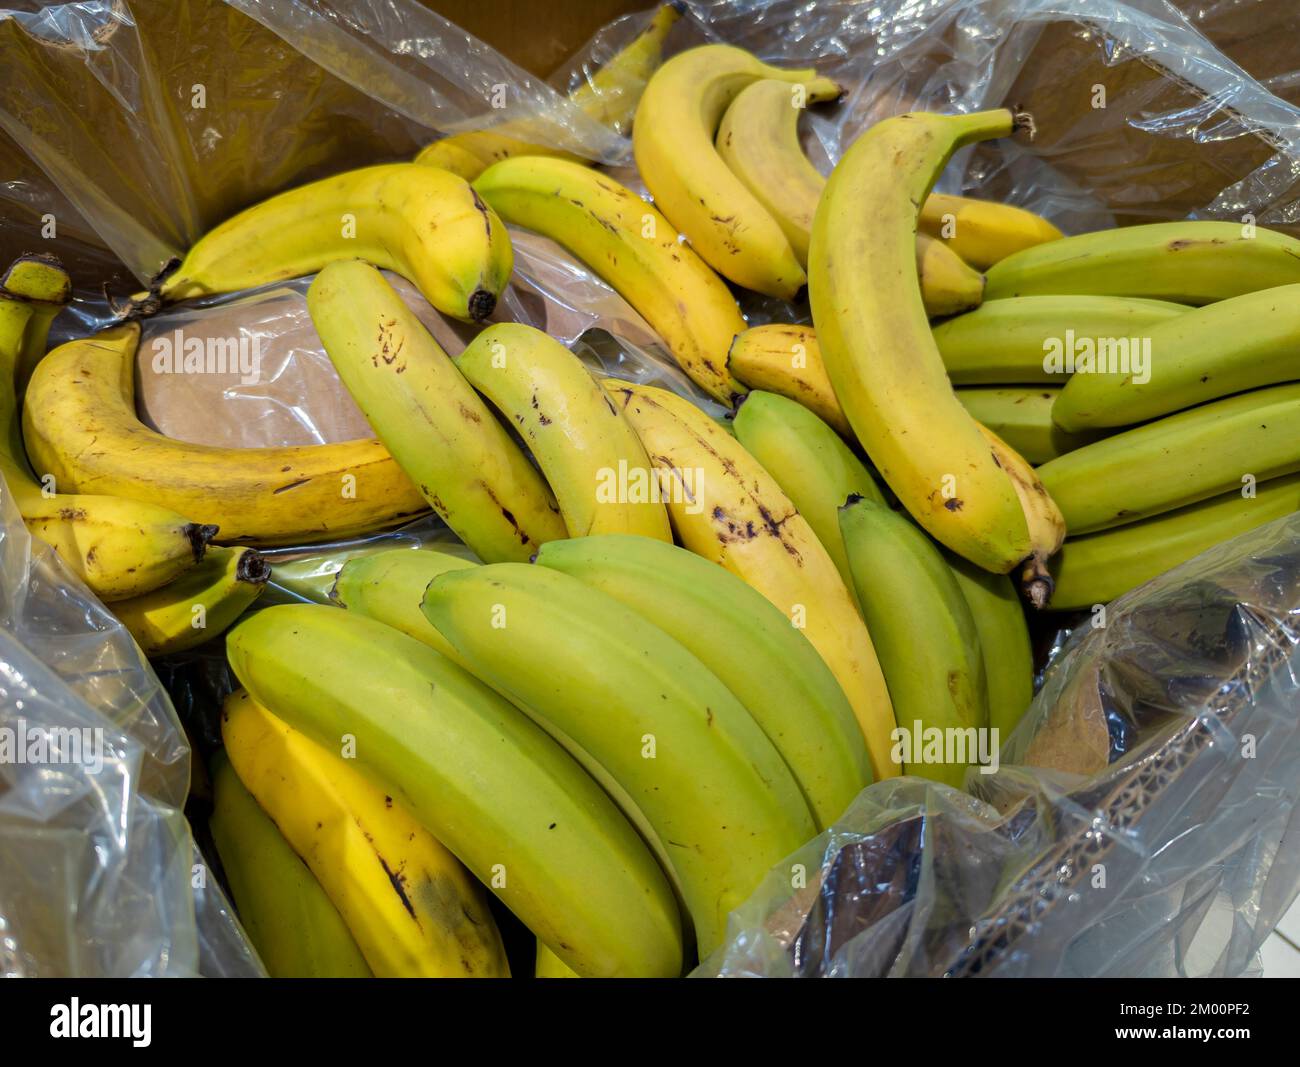 Canarian bananas in cardboard boxes in a supermarket ready for sale Stock Photo